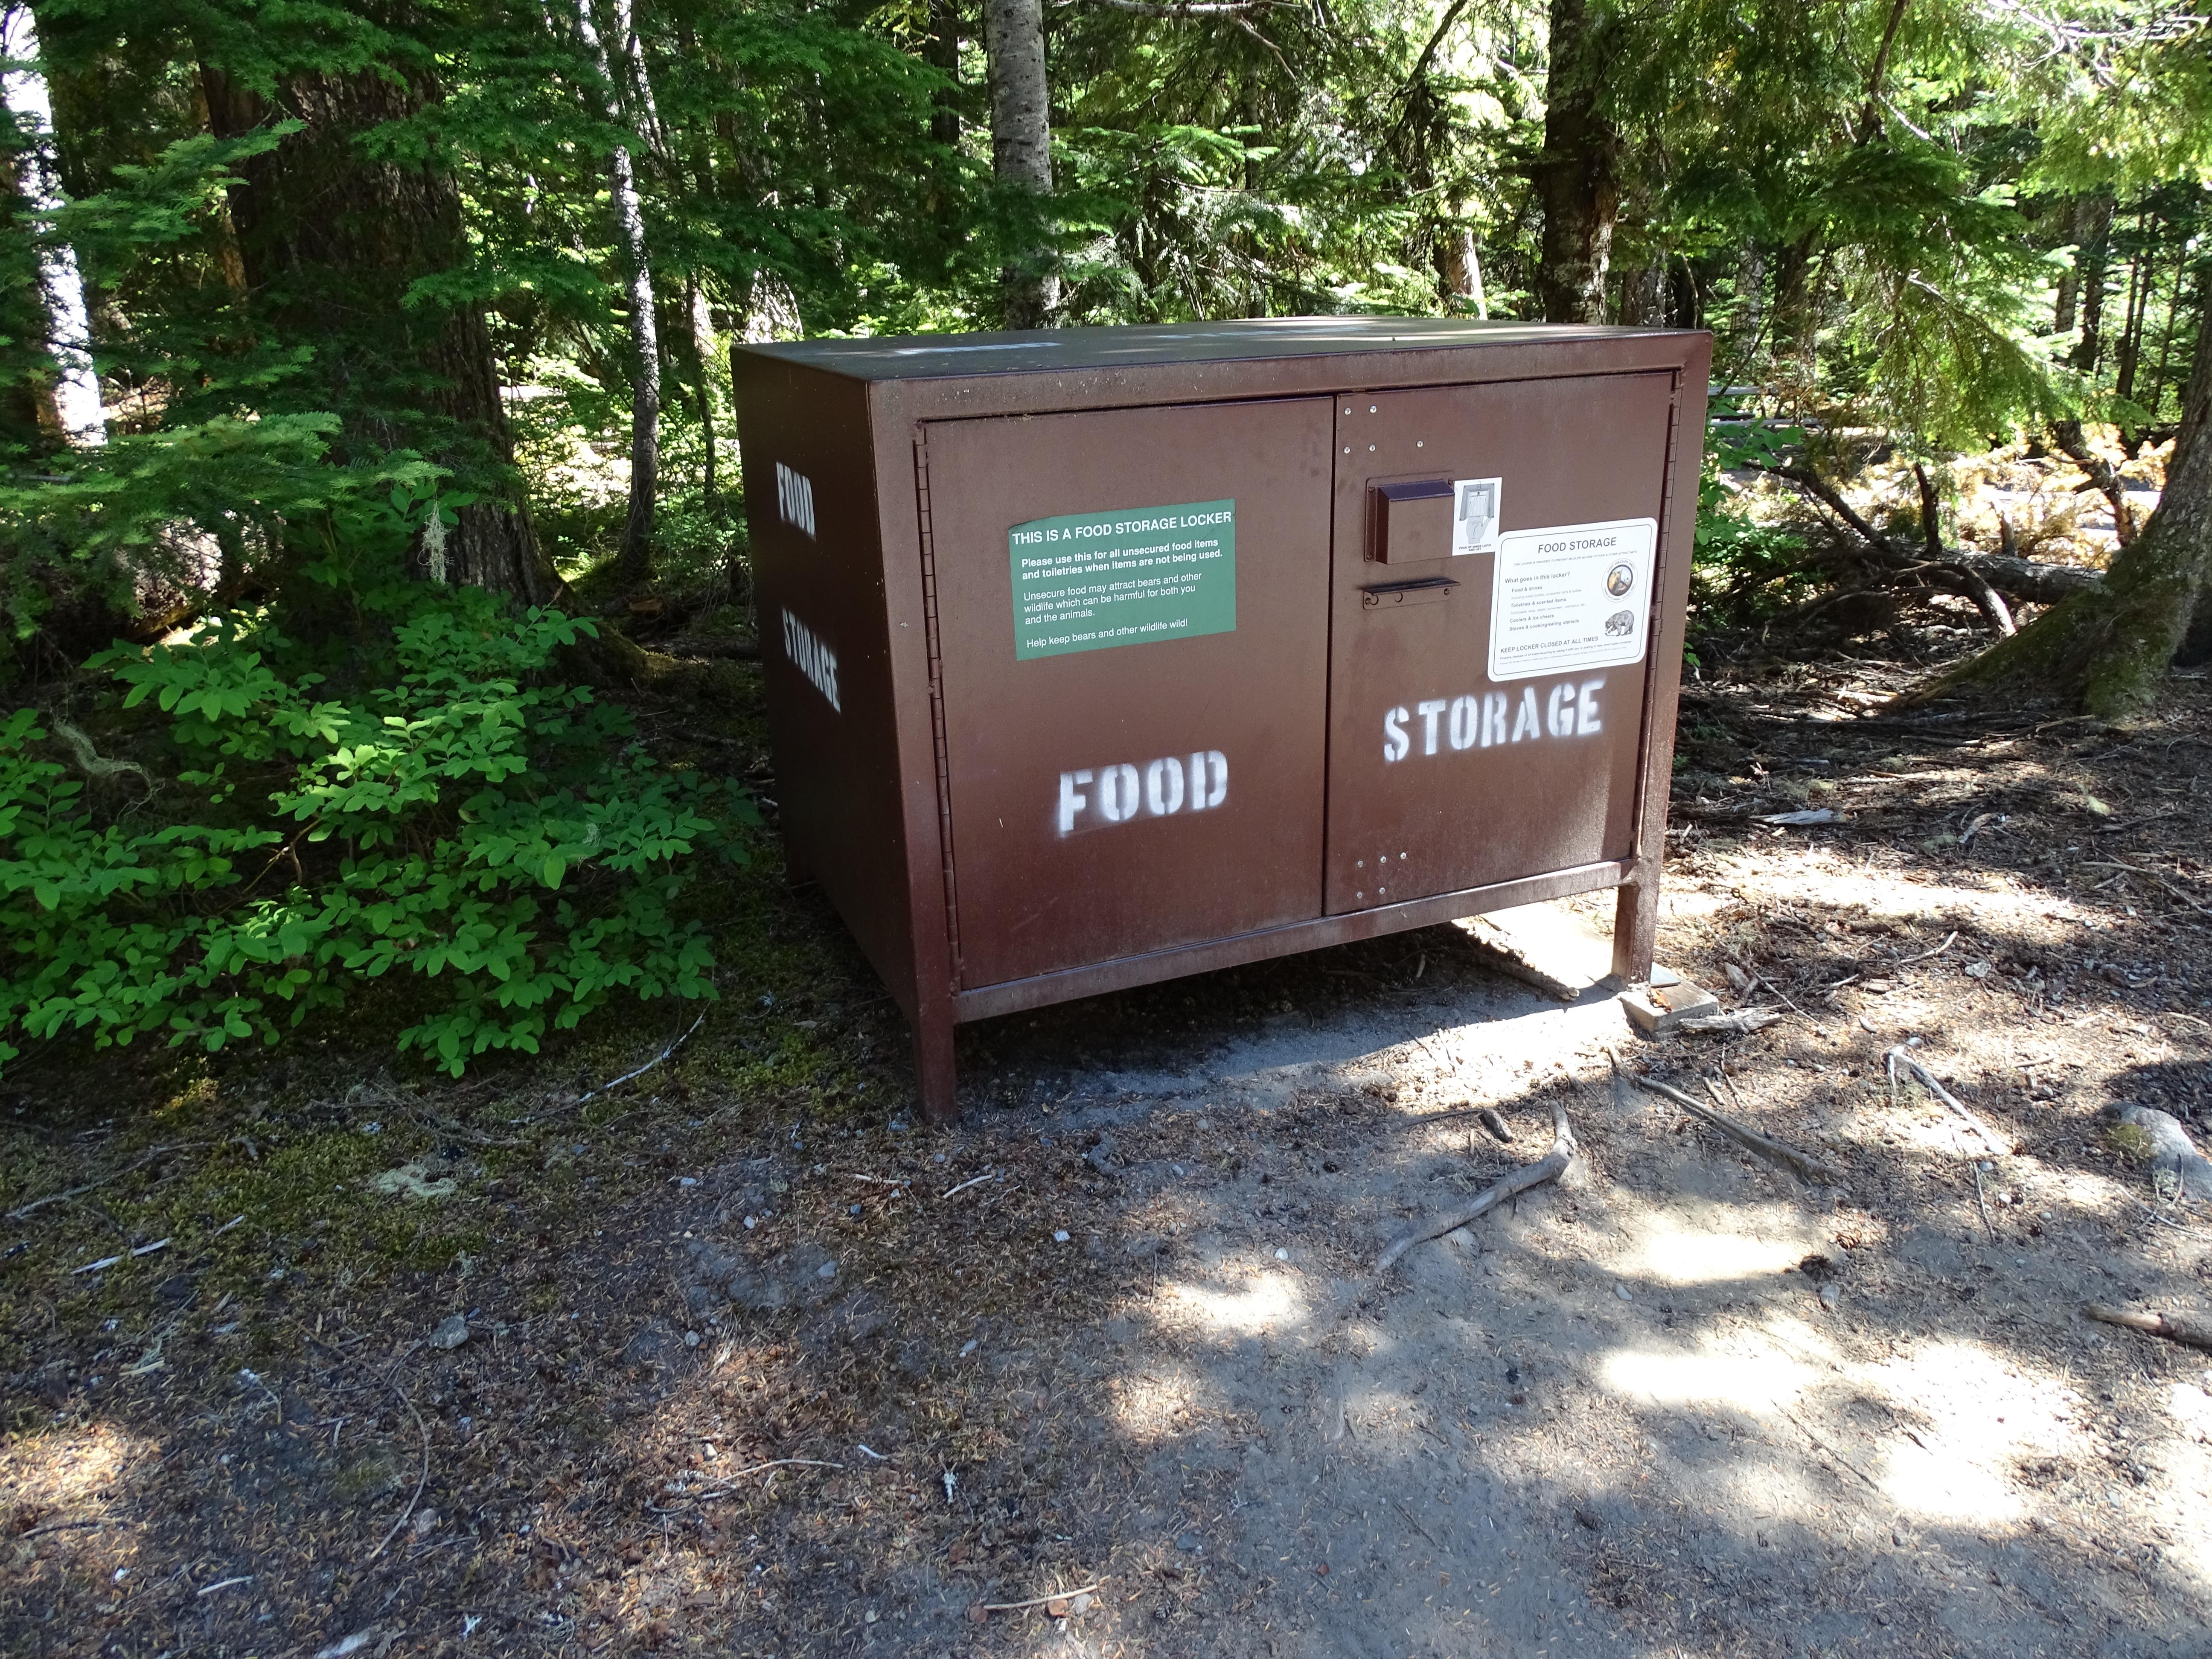 A brown rectangular metal container marked "food storage"